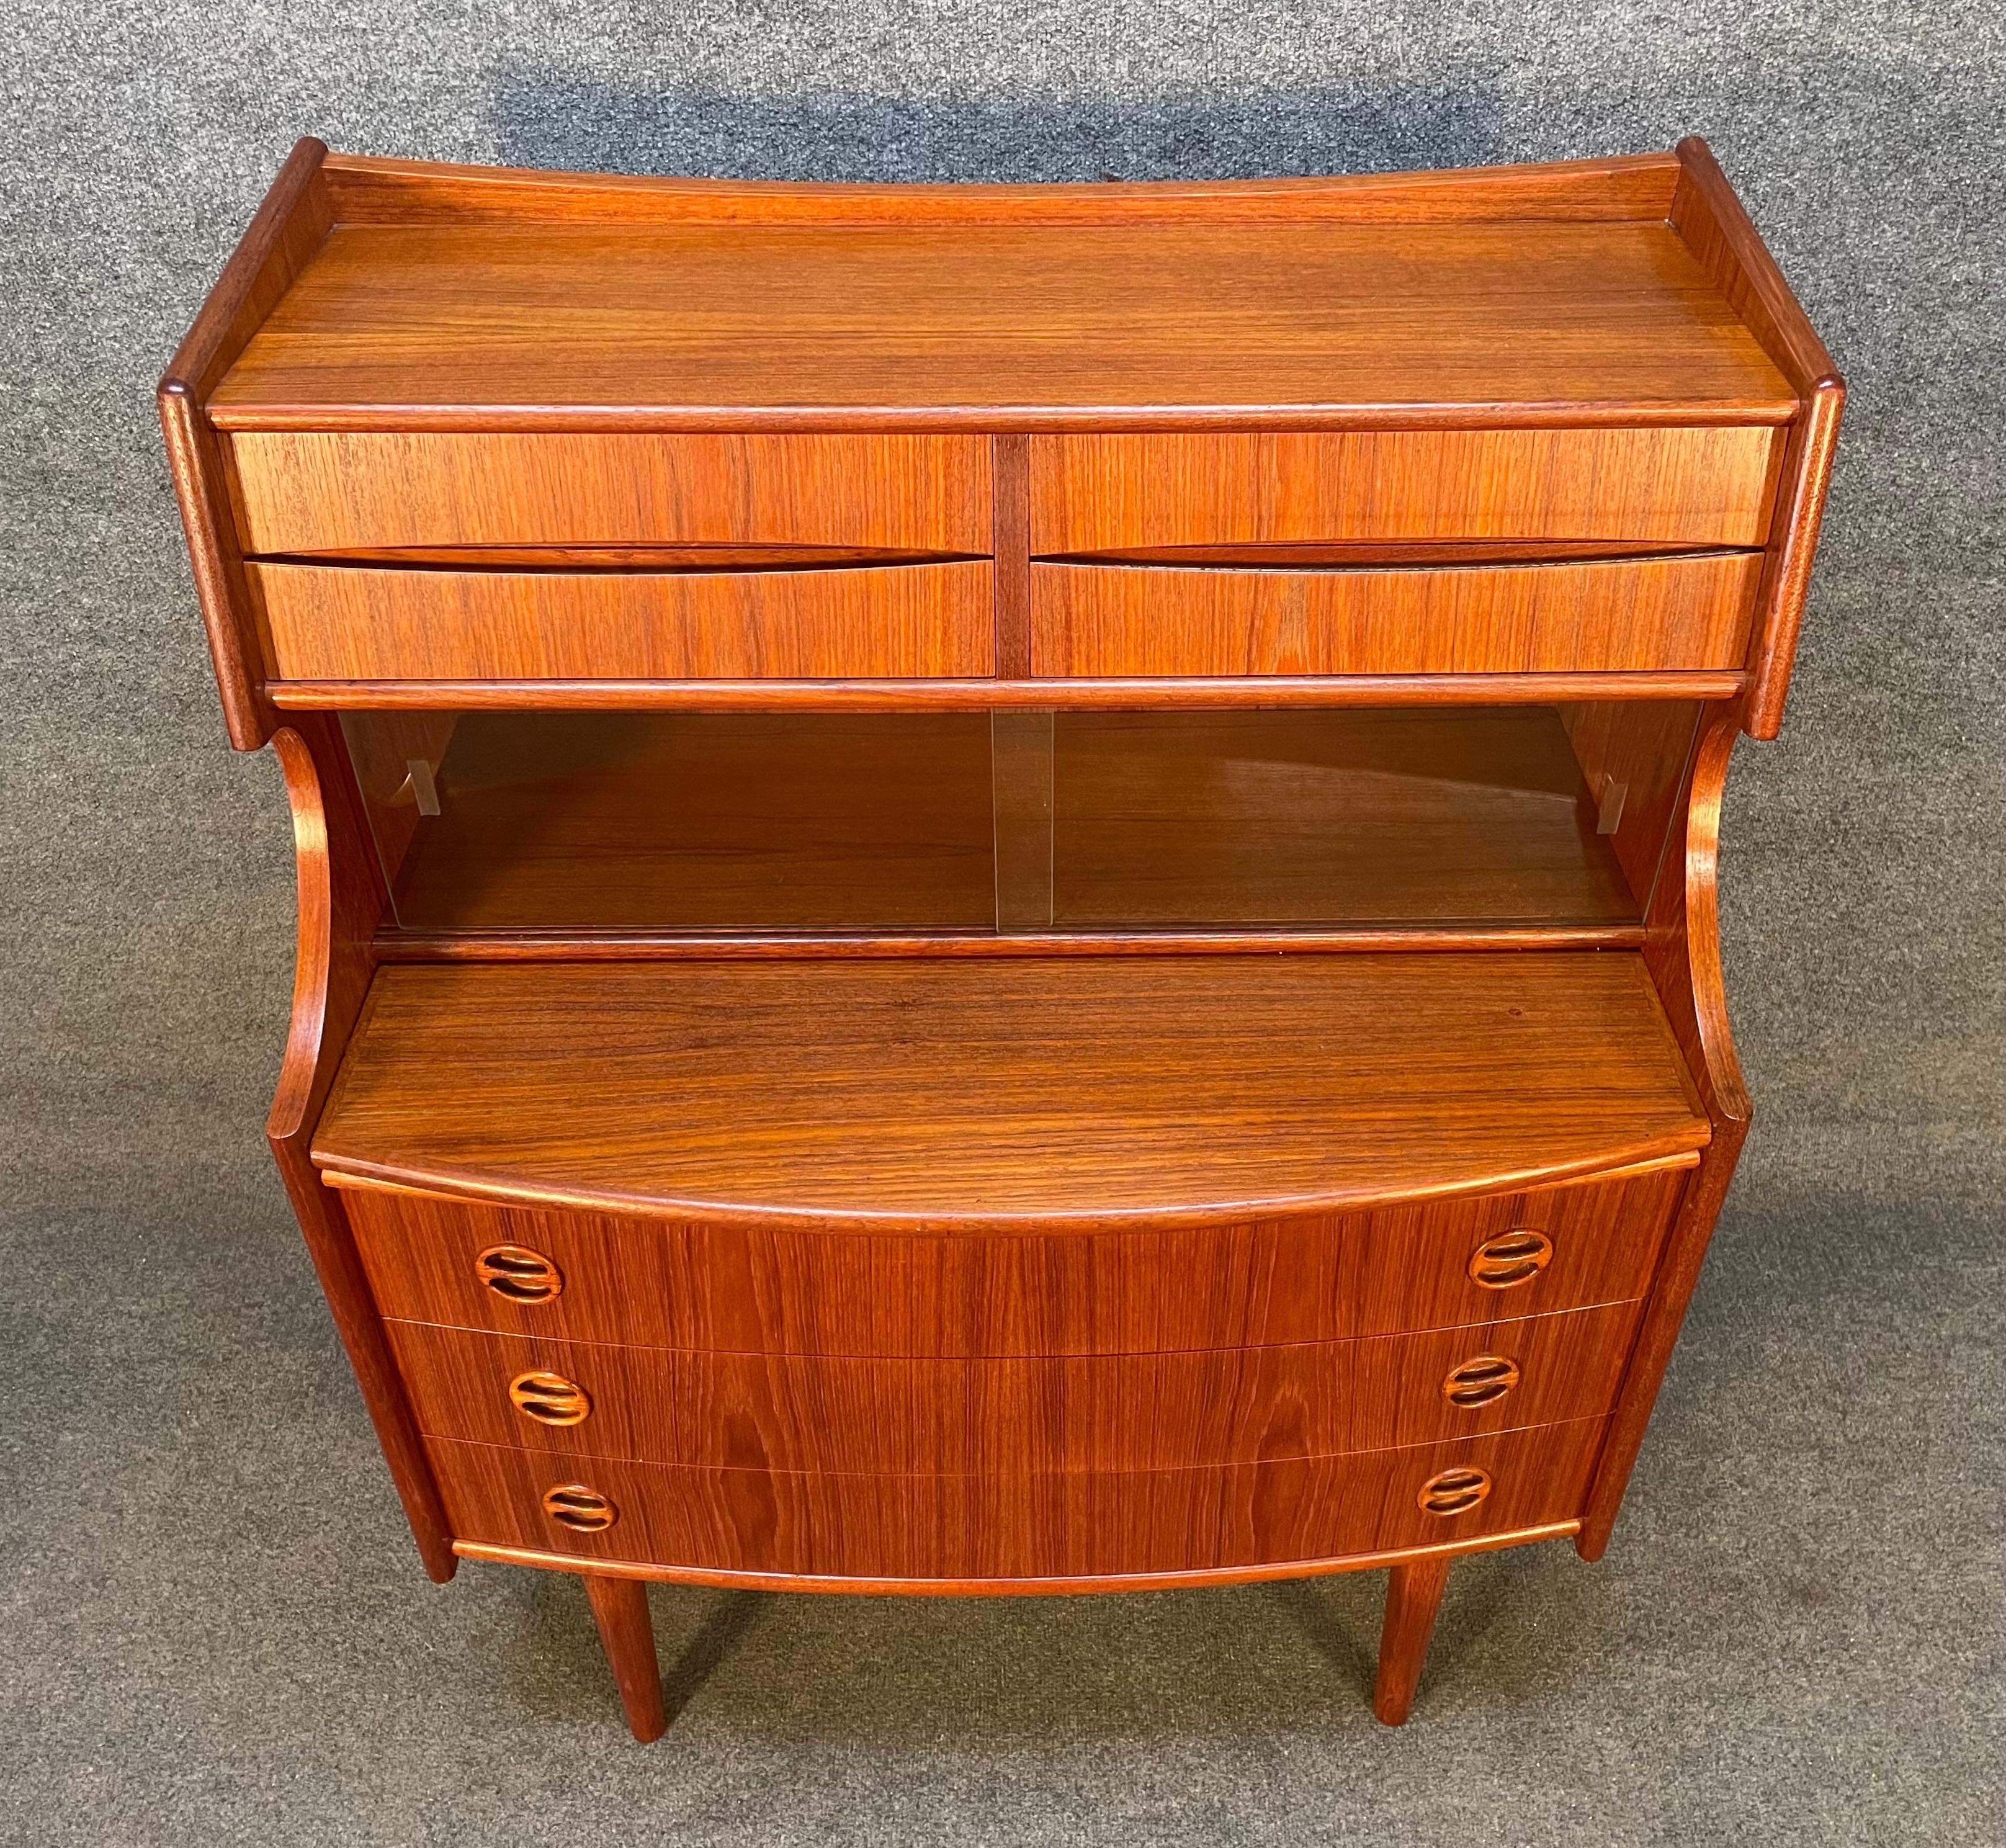 Here is a beautiful scandinavian modern secretary desk in teak manufactured by Falsig Mobler in Denmark in the 1960's.
This special case piece, recently imported from Europe to California before its refinishing, features a vibrant wood grain, four